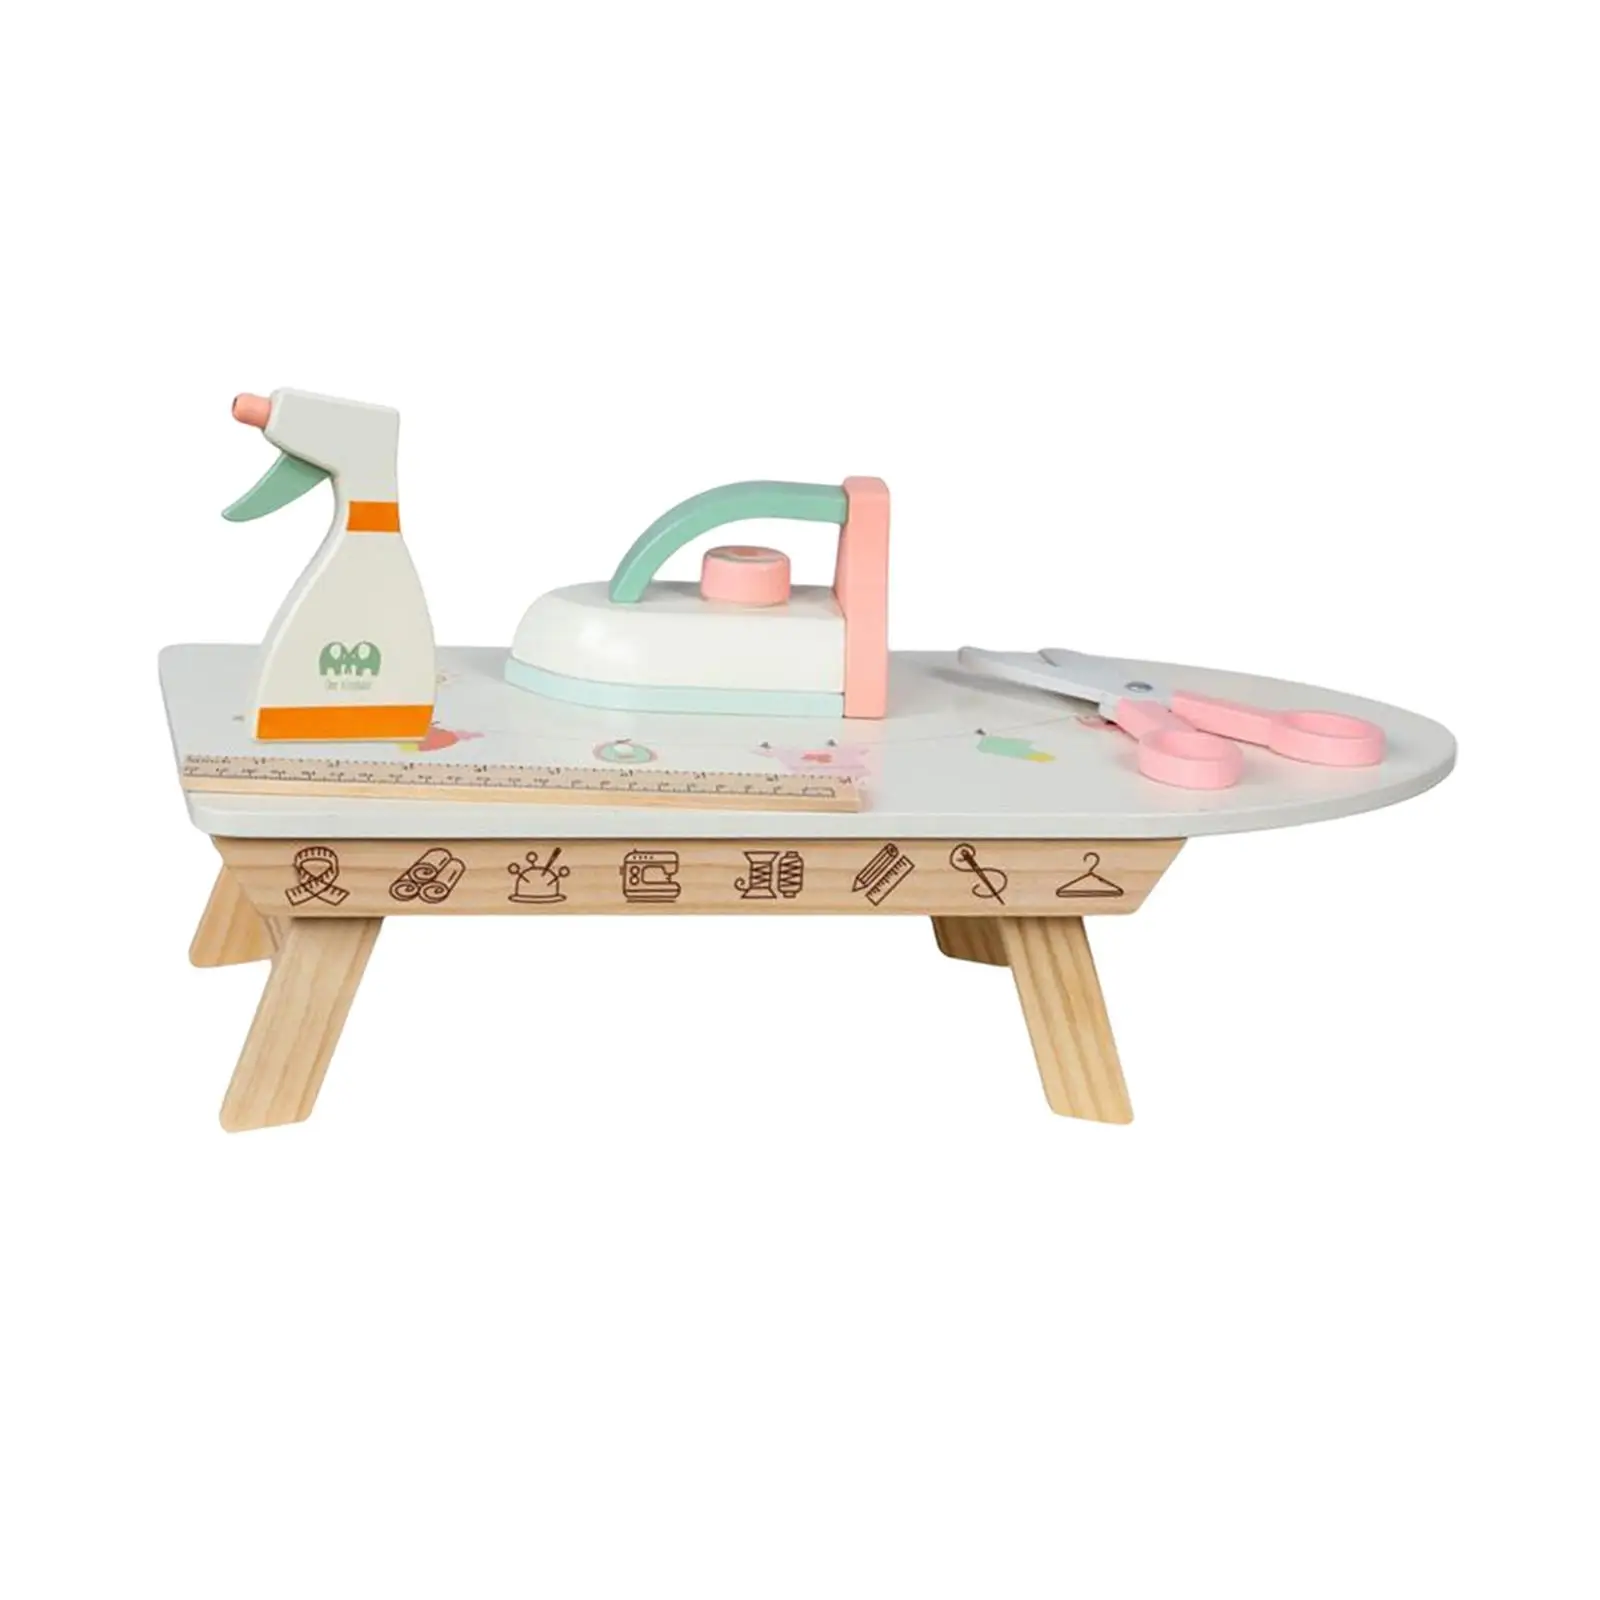 Simulation Ironing Toy Wood Handicraft Toy Fine Motor Skill with Wooden Iron, Ironing Board, and Accessories for Children Kids